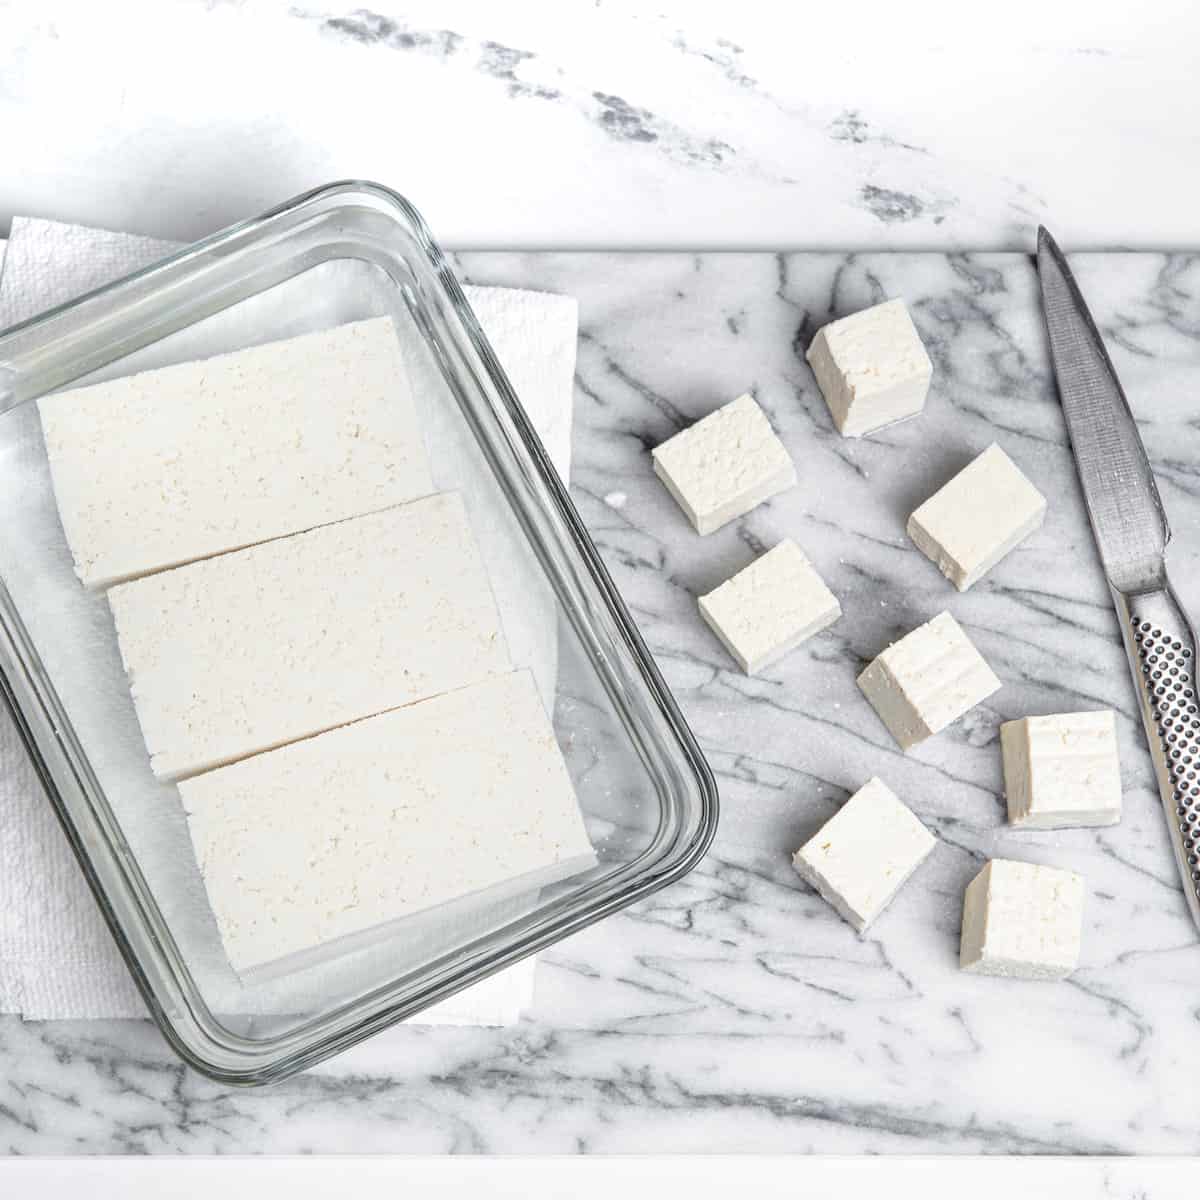 Cutting tofu into cubes from a glass dish and on a kitchen counter.